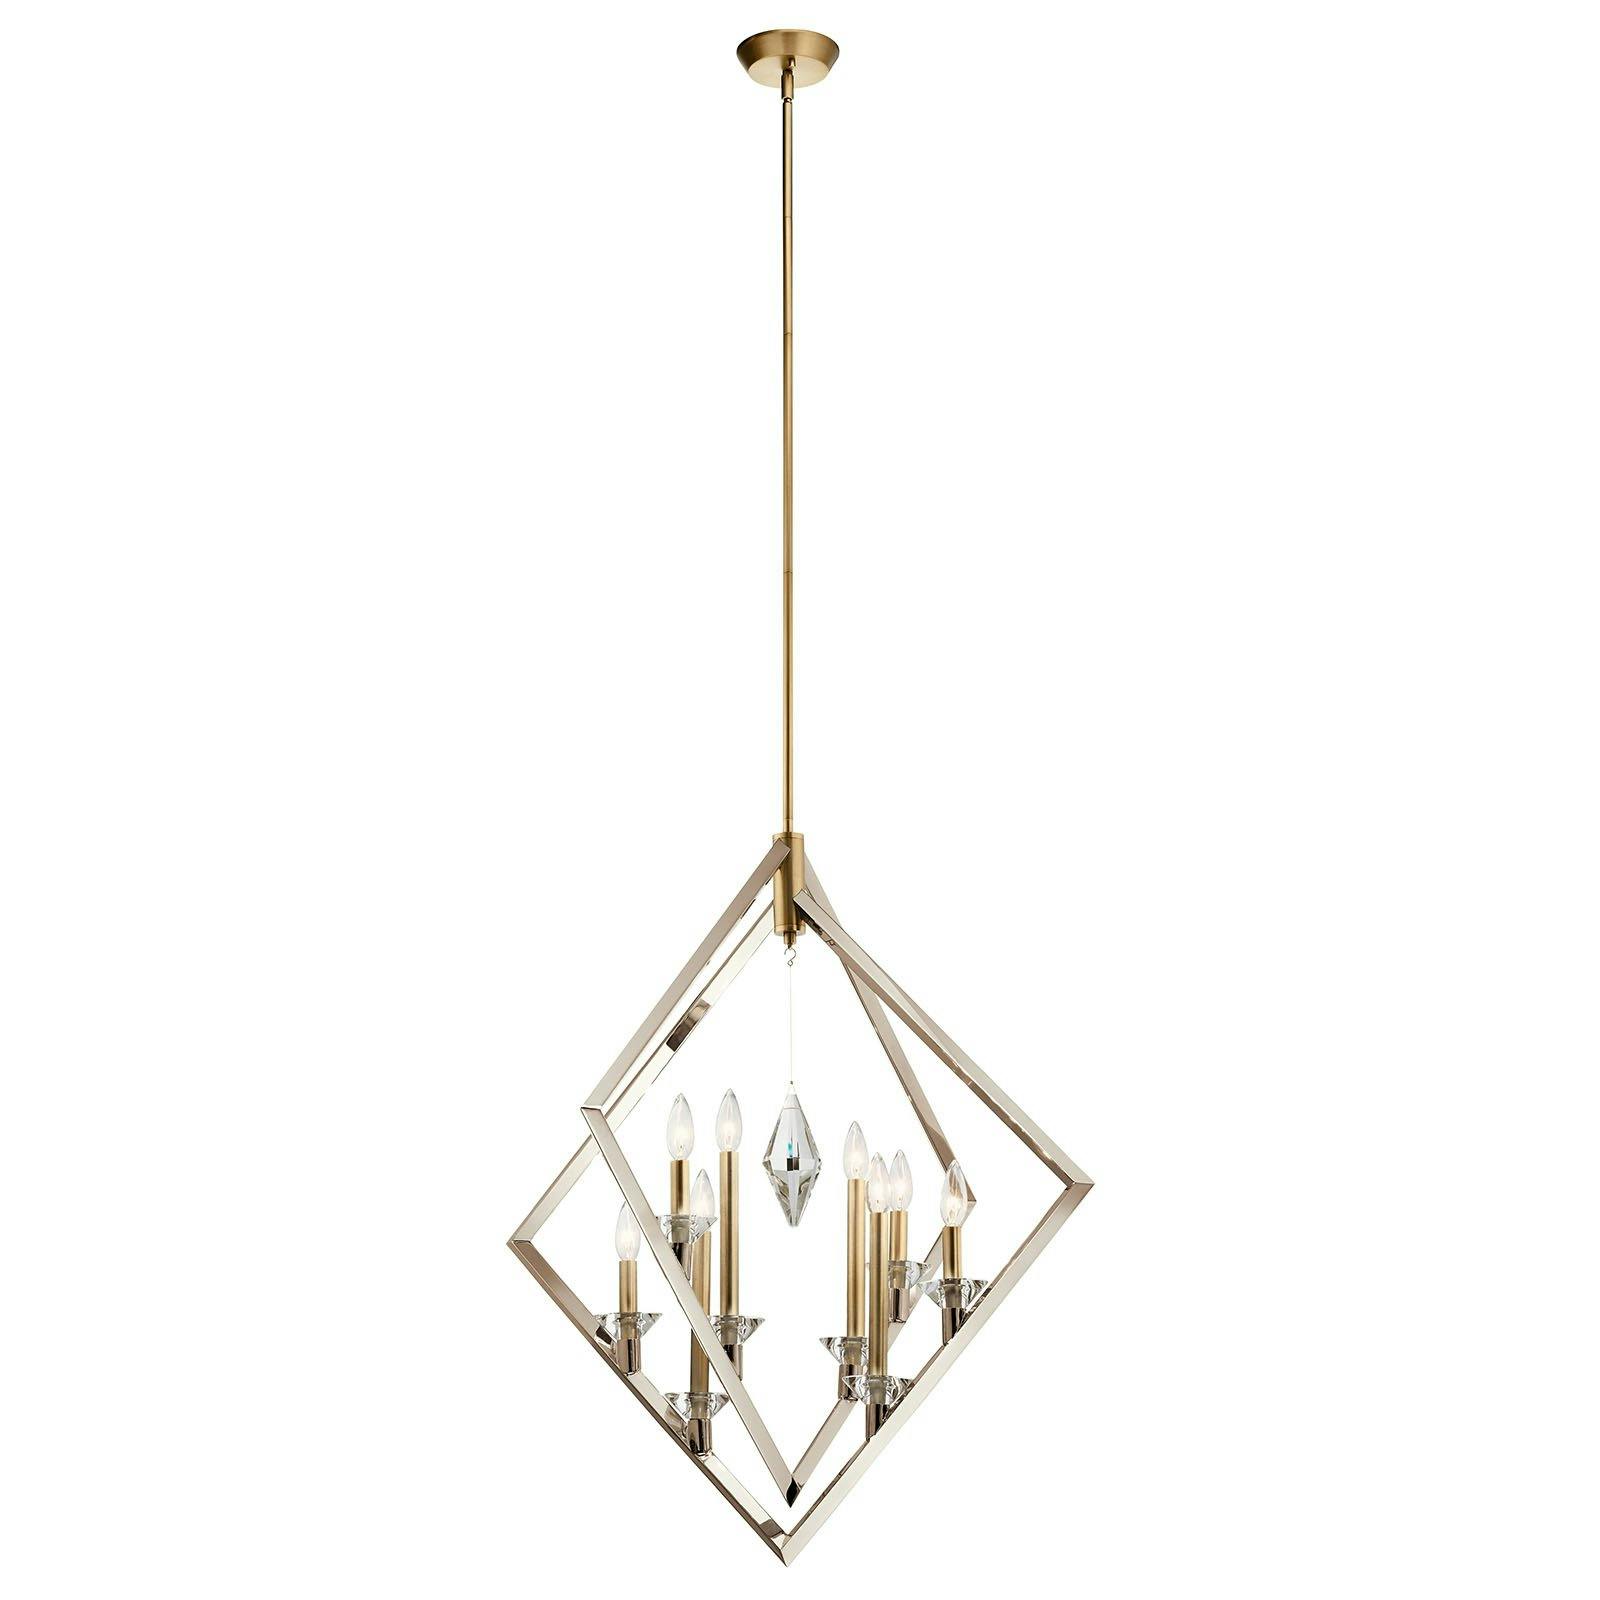 Layan 8 Light Foyer Pendant Nickel on a white background